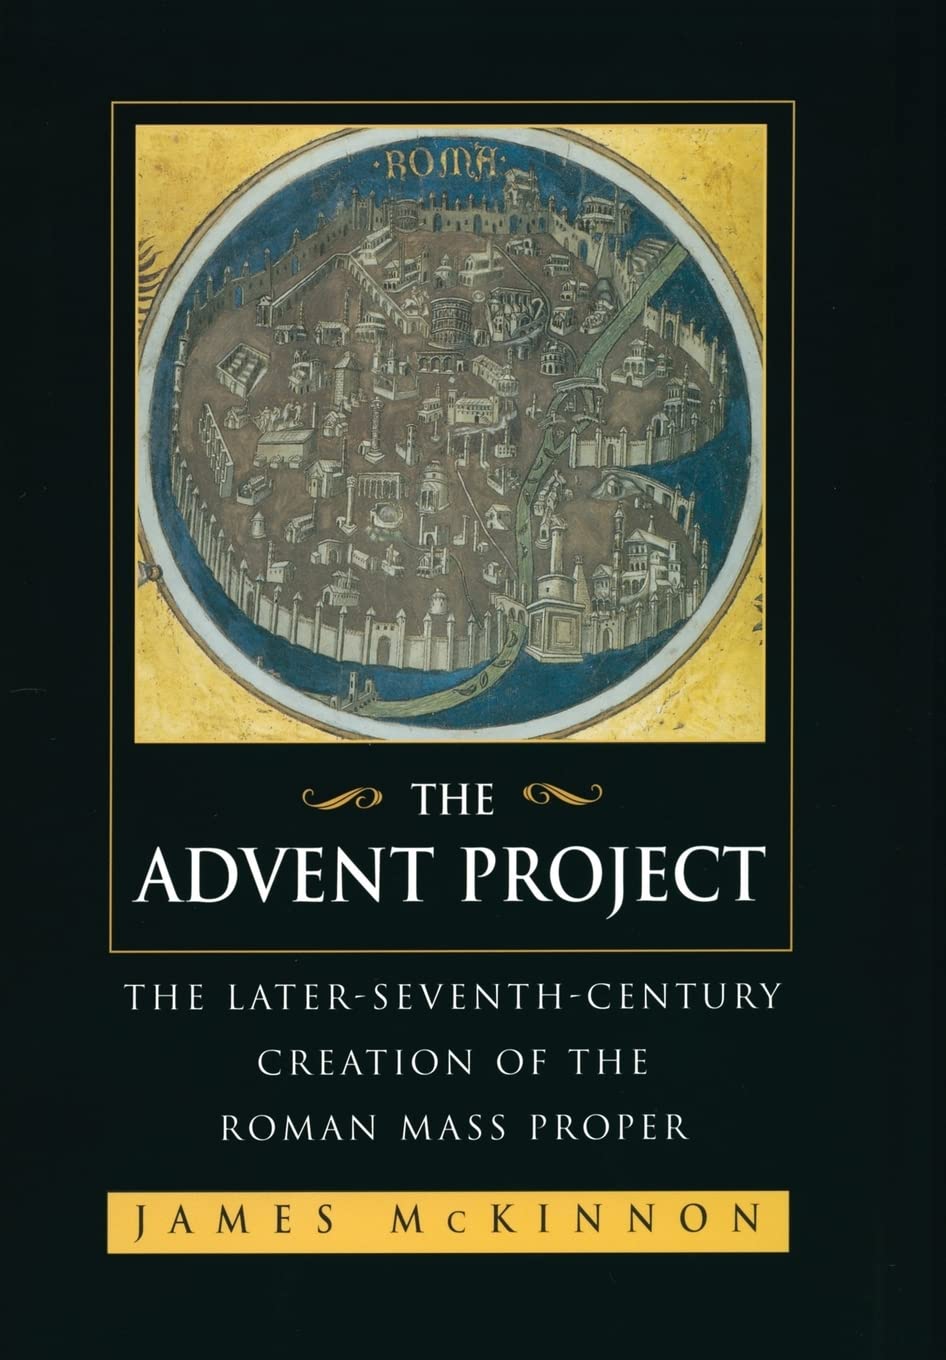 The Advent Project: The Later-Seventh-Century Creation of the Roman Mass Proper